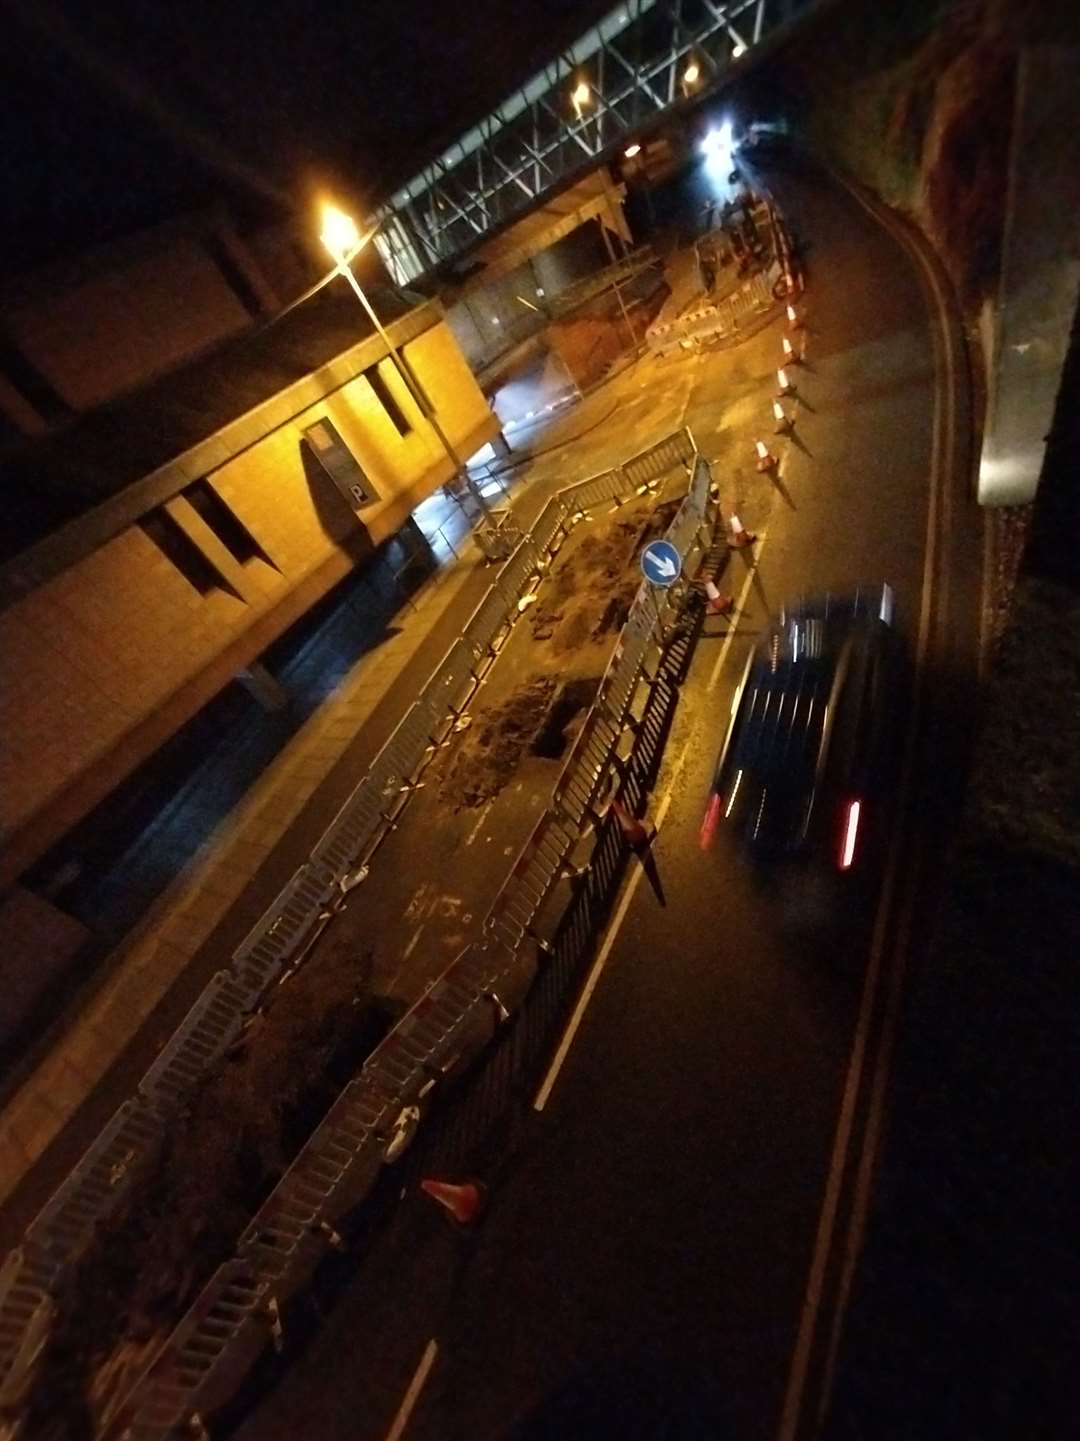 The road excavations have taken place next to an entrance to the Eastgate Shopping Centre. Picture: Hector Mackenzie